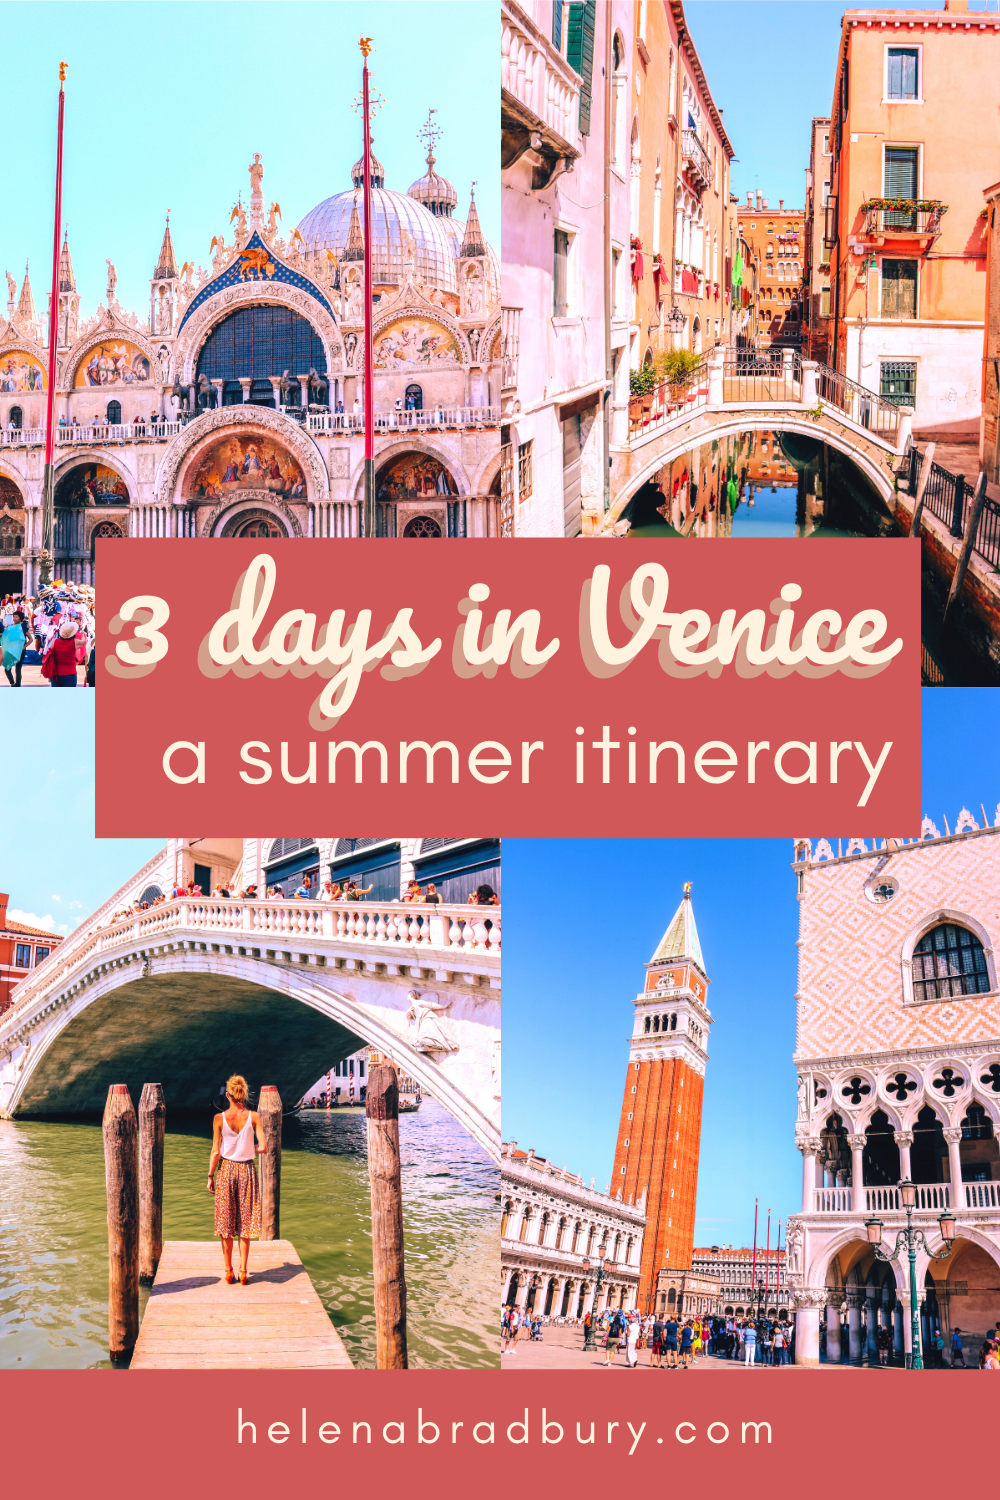 It’s hard to pick the best time to visit Venice, Italy because it’s always so busy, this itinerary for 3 days in Venice helps you make the most of your trip to Venice in summer, with plenty of things to see and do and avoid the worst of the crowds |…